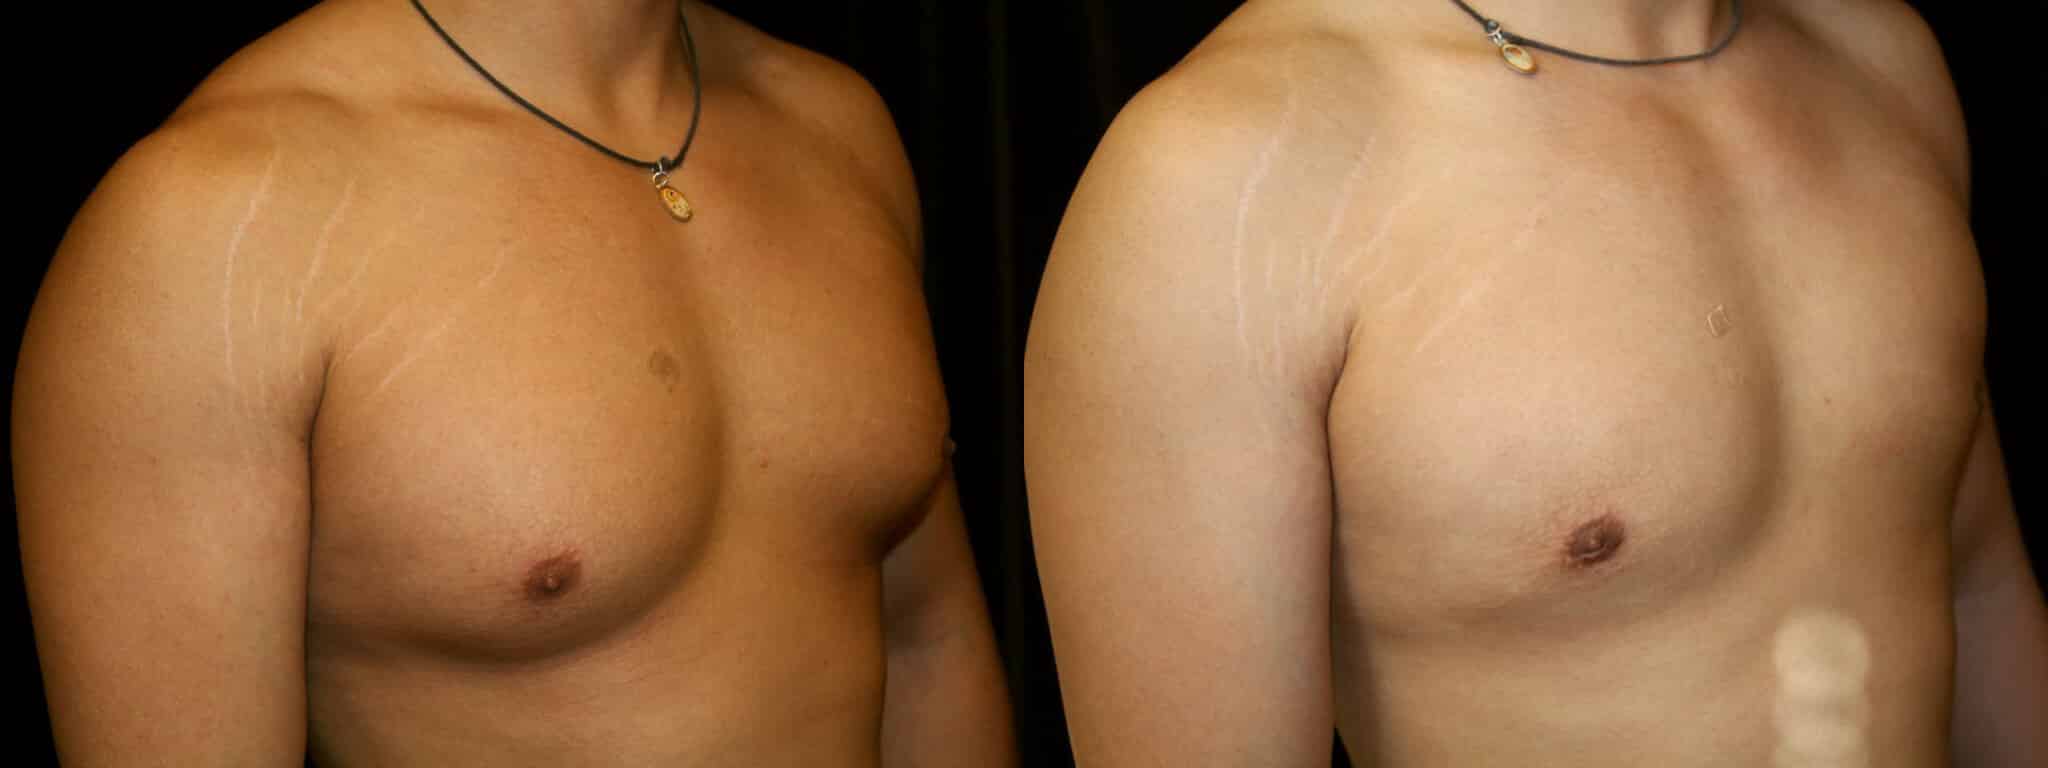 Gynecomastia Patient 14 Before & After Details